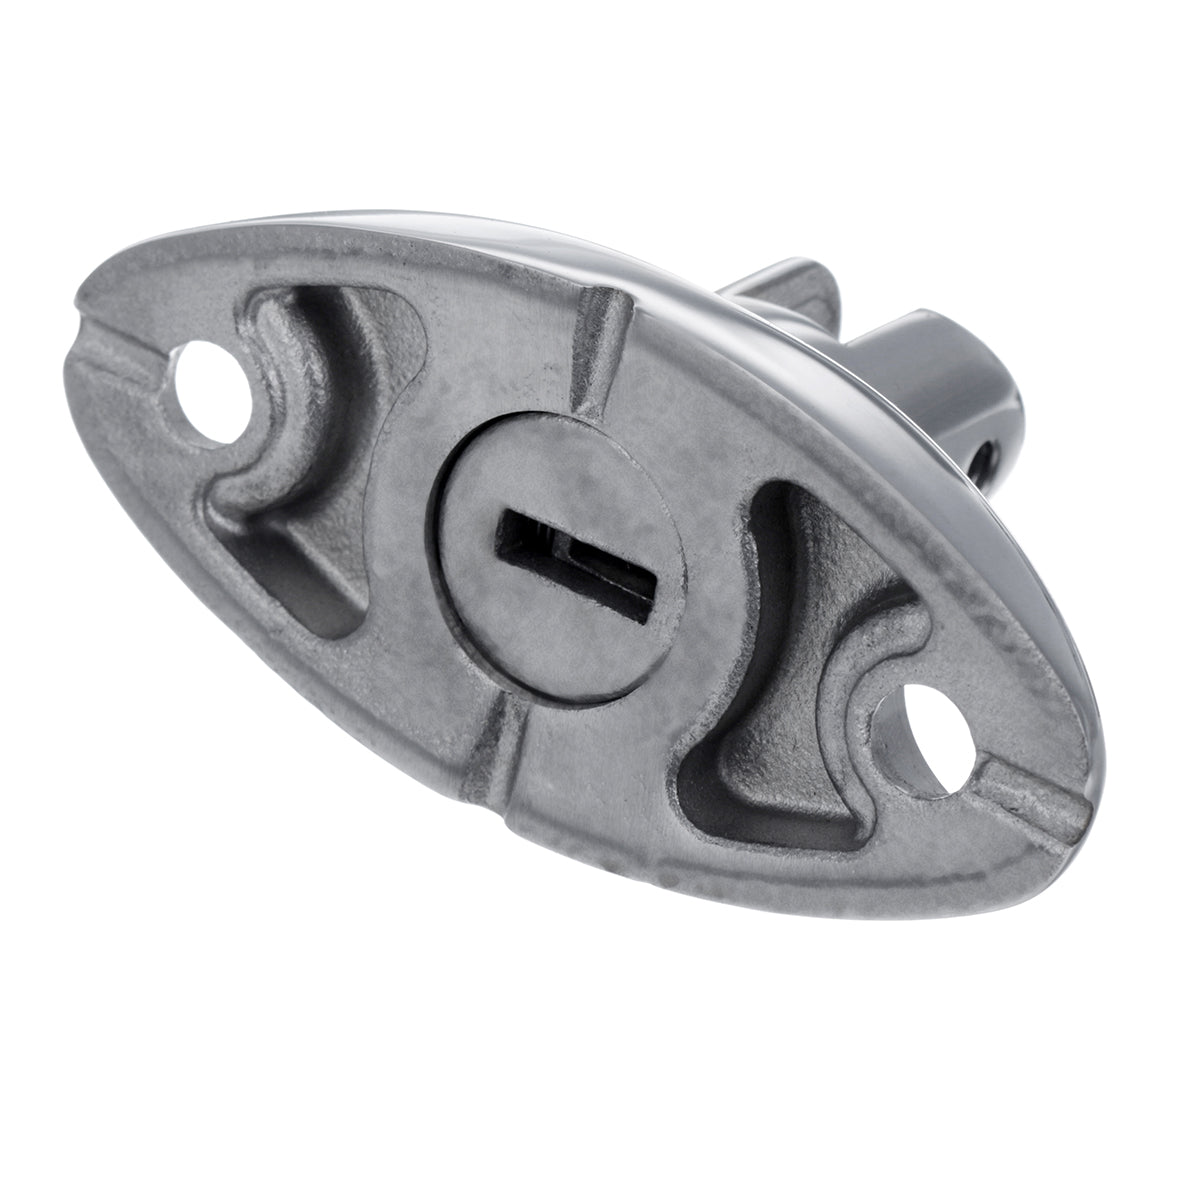 Dark Gray 360° Rotated Deck Hinge Connector Stainless Steel Boat Marine Fitting Hardware